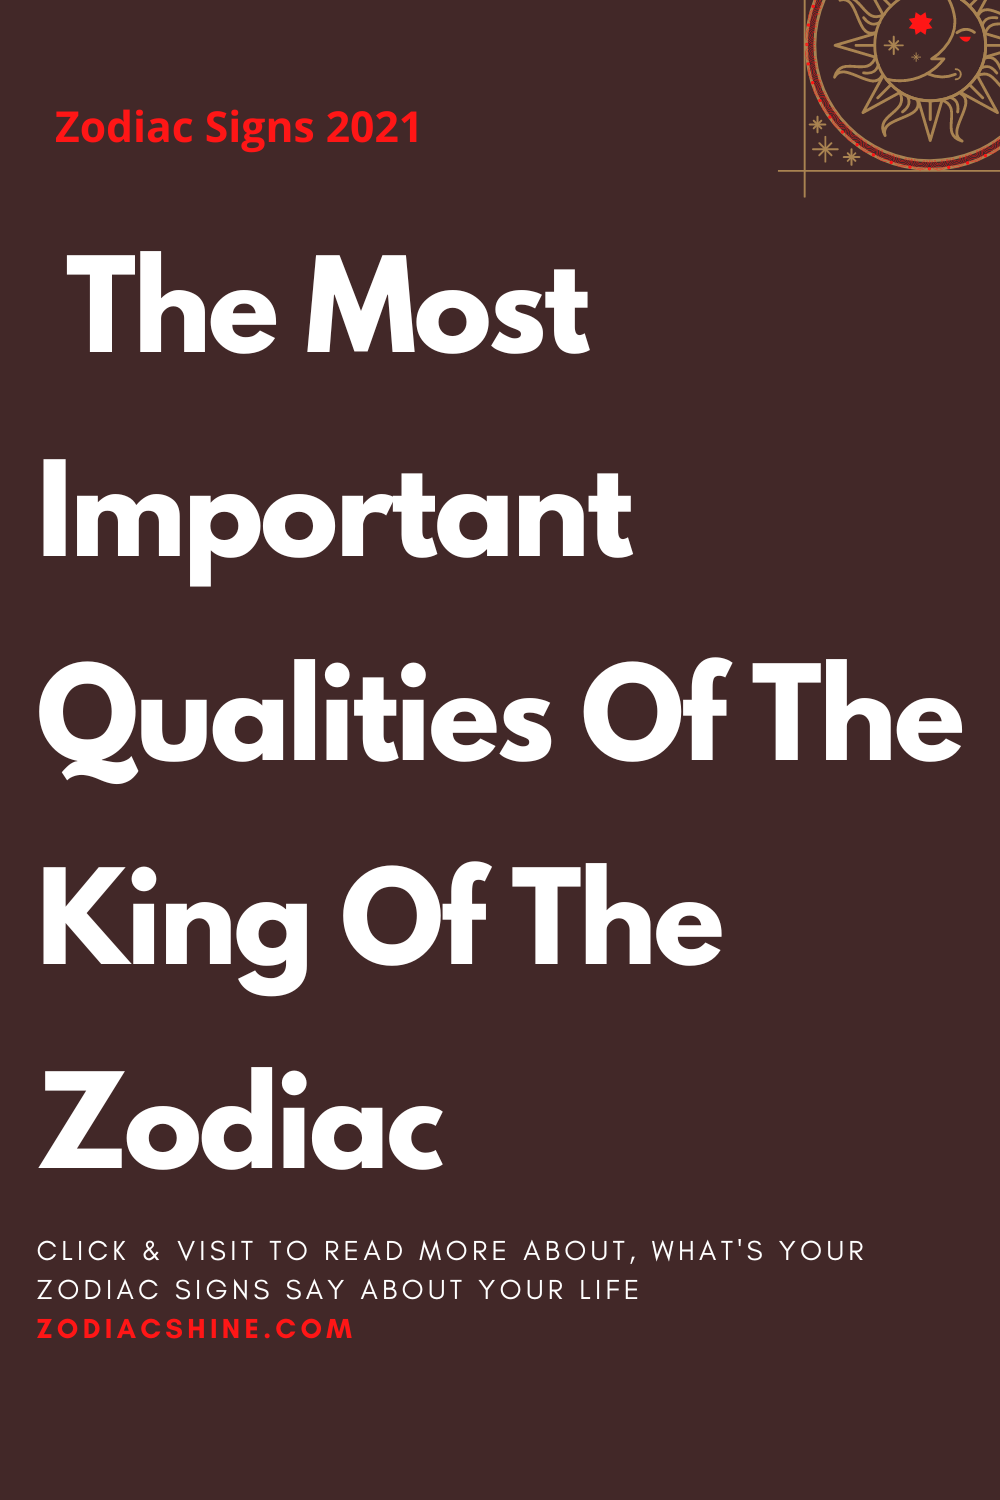  The Most Important Qualities Of The King Of The Zodiac